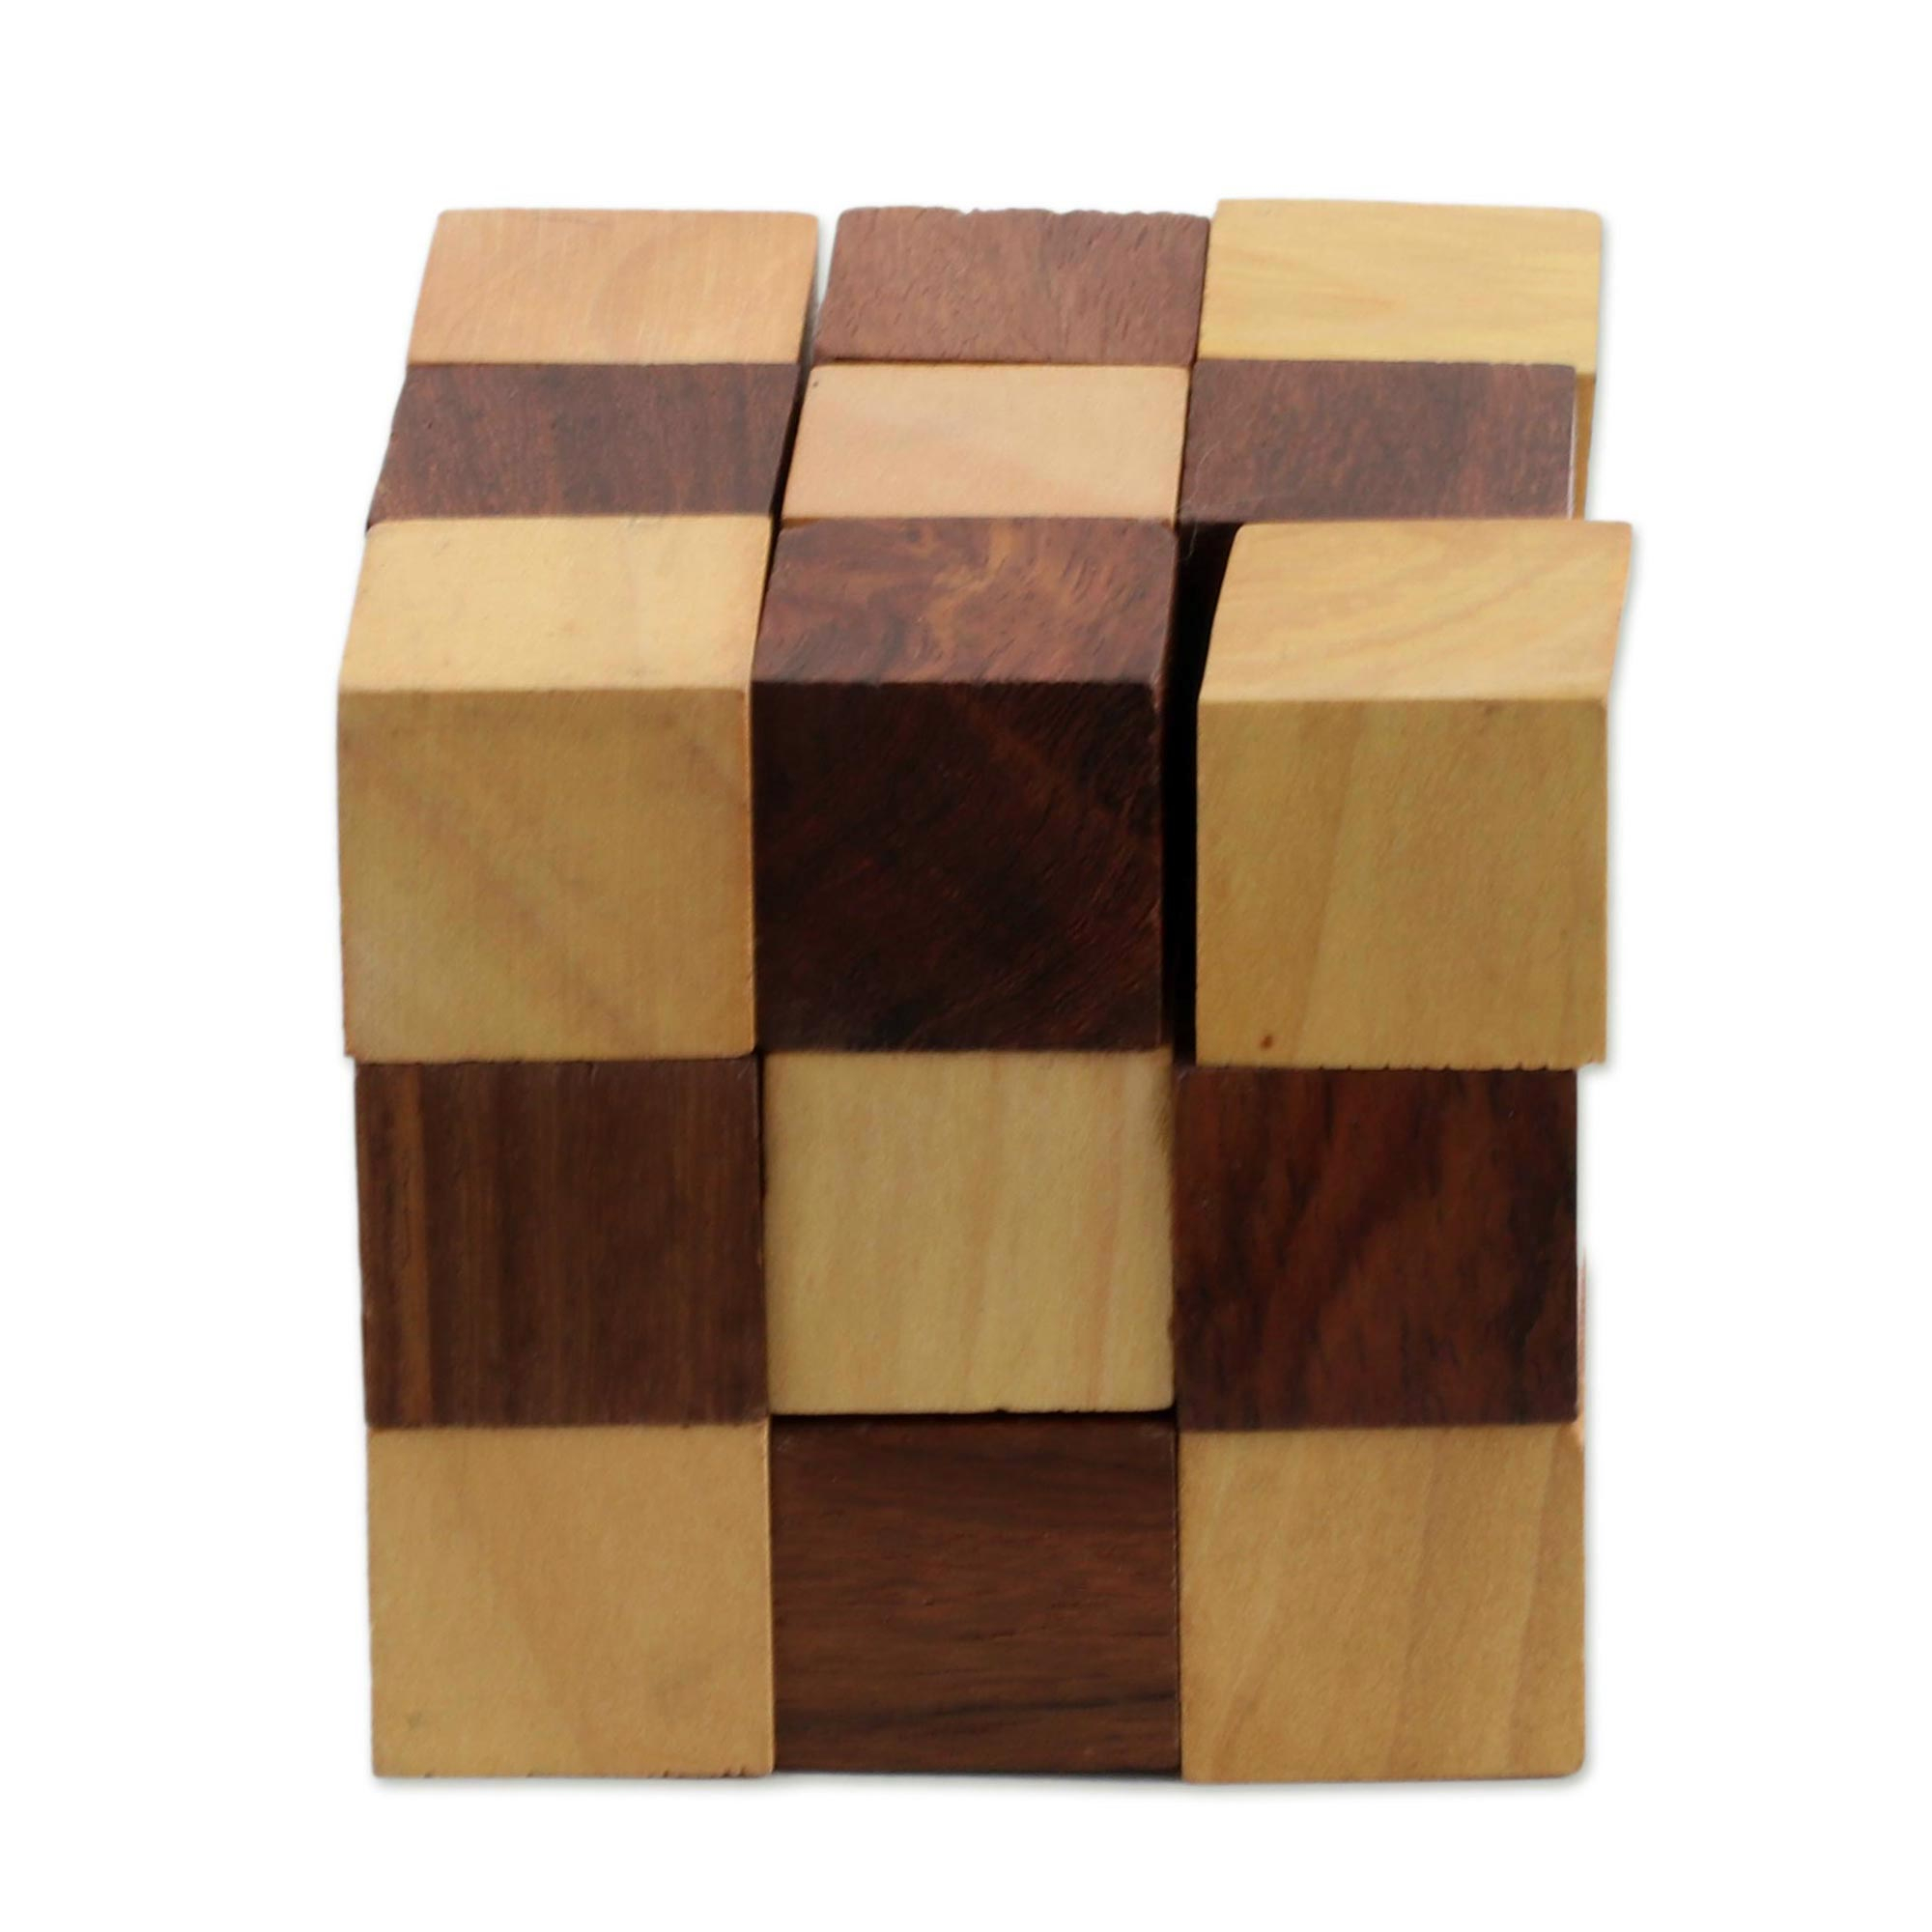 Handcrafted Cube-Shaped Wood Puzzle from India - Test Your Mind | NOVICA